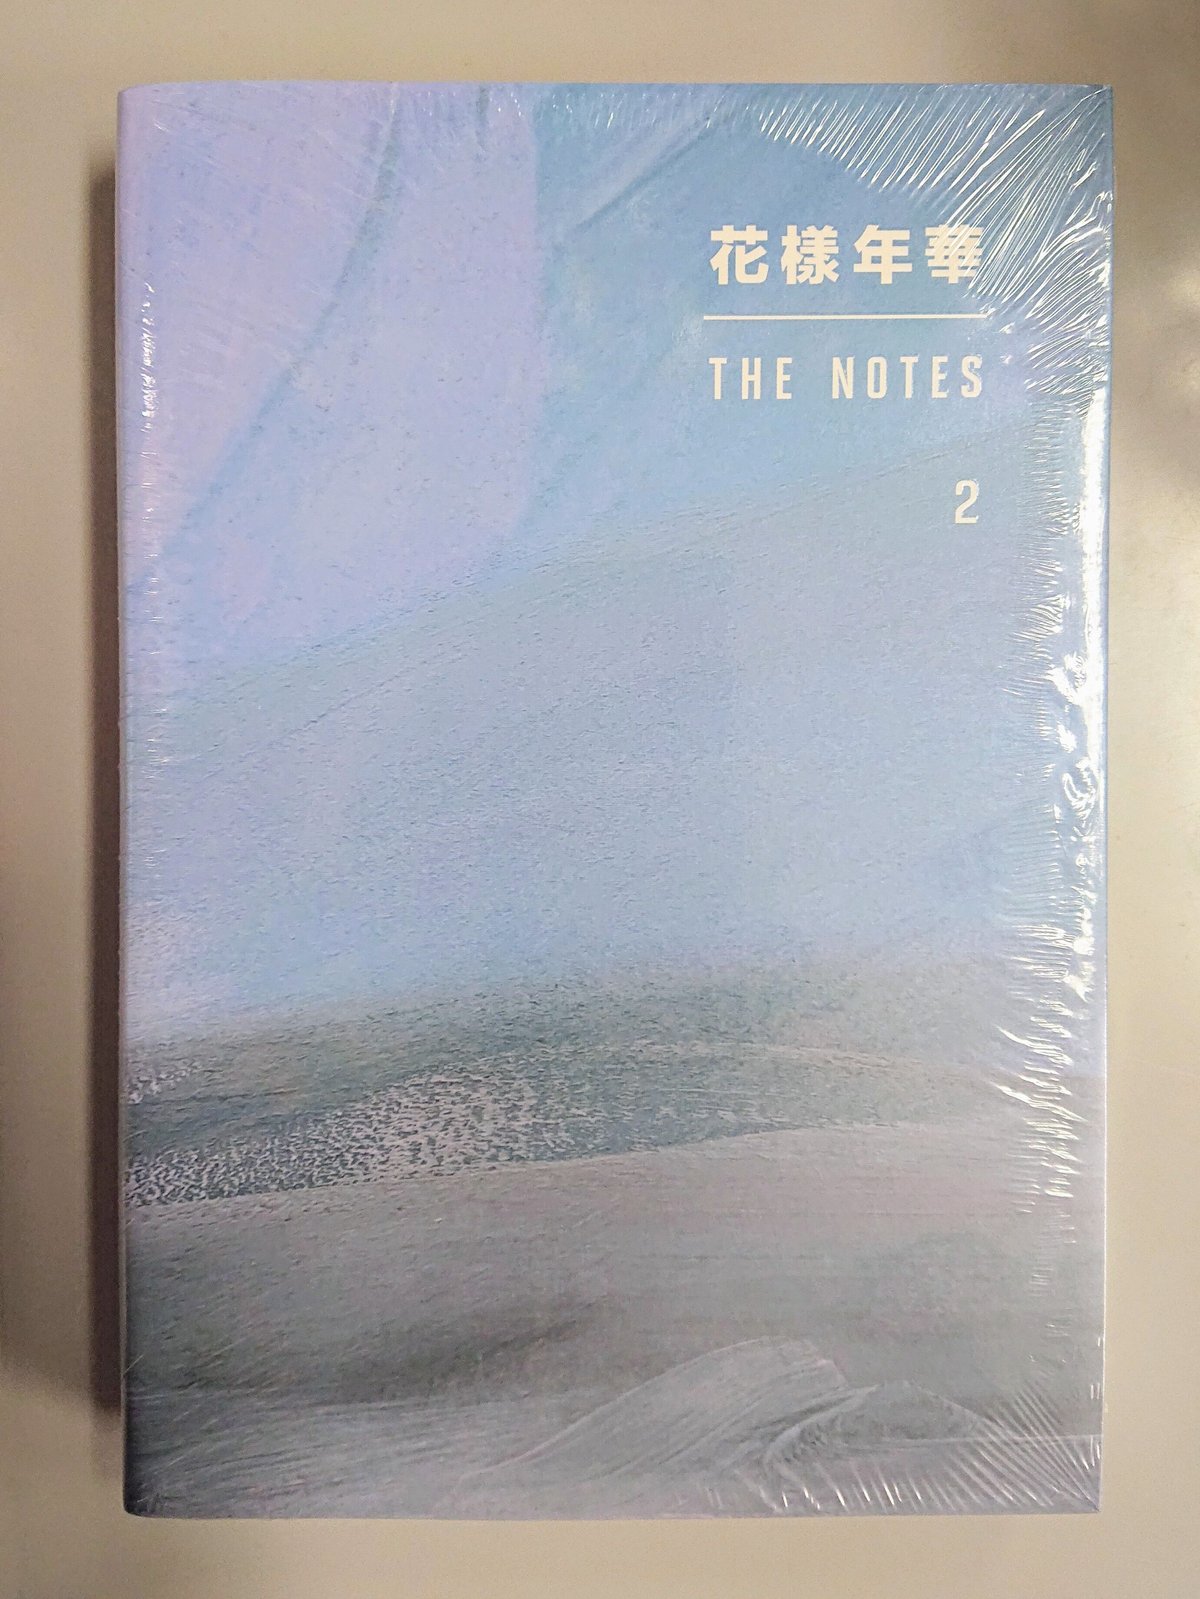 BTS 花様年華 THE NOTES1 ＋ノート、NOTES2 - 文学/小説